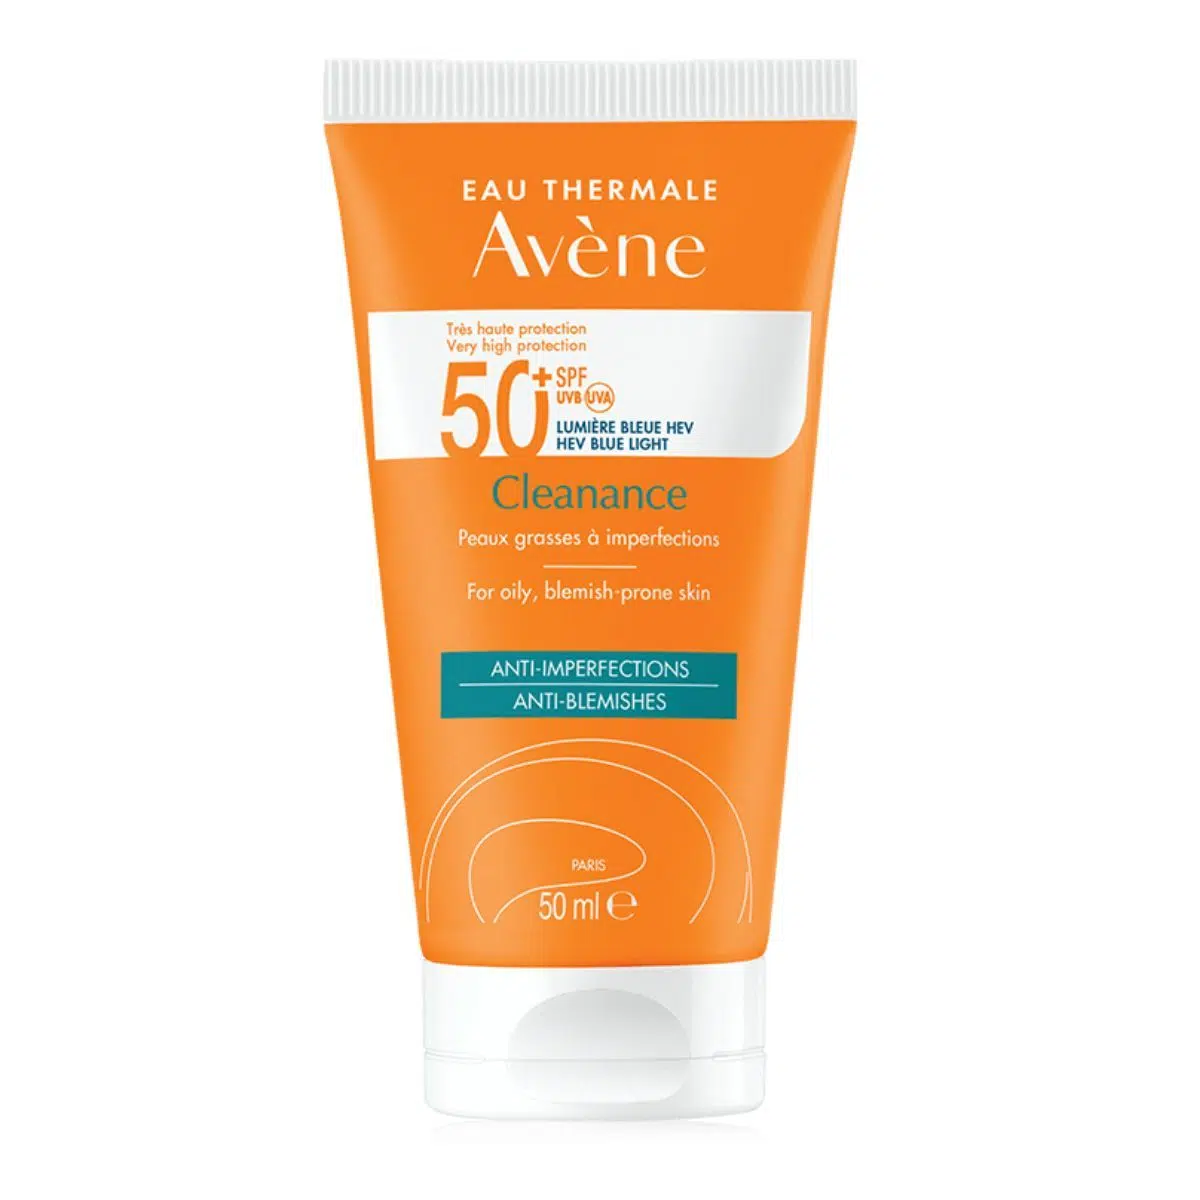 Avène Cleanance SPF50+ sunscreen for cleansing.